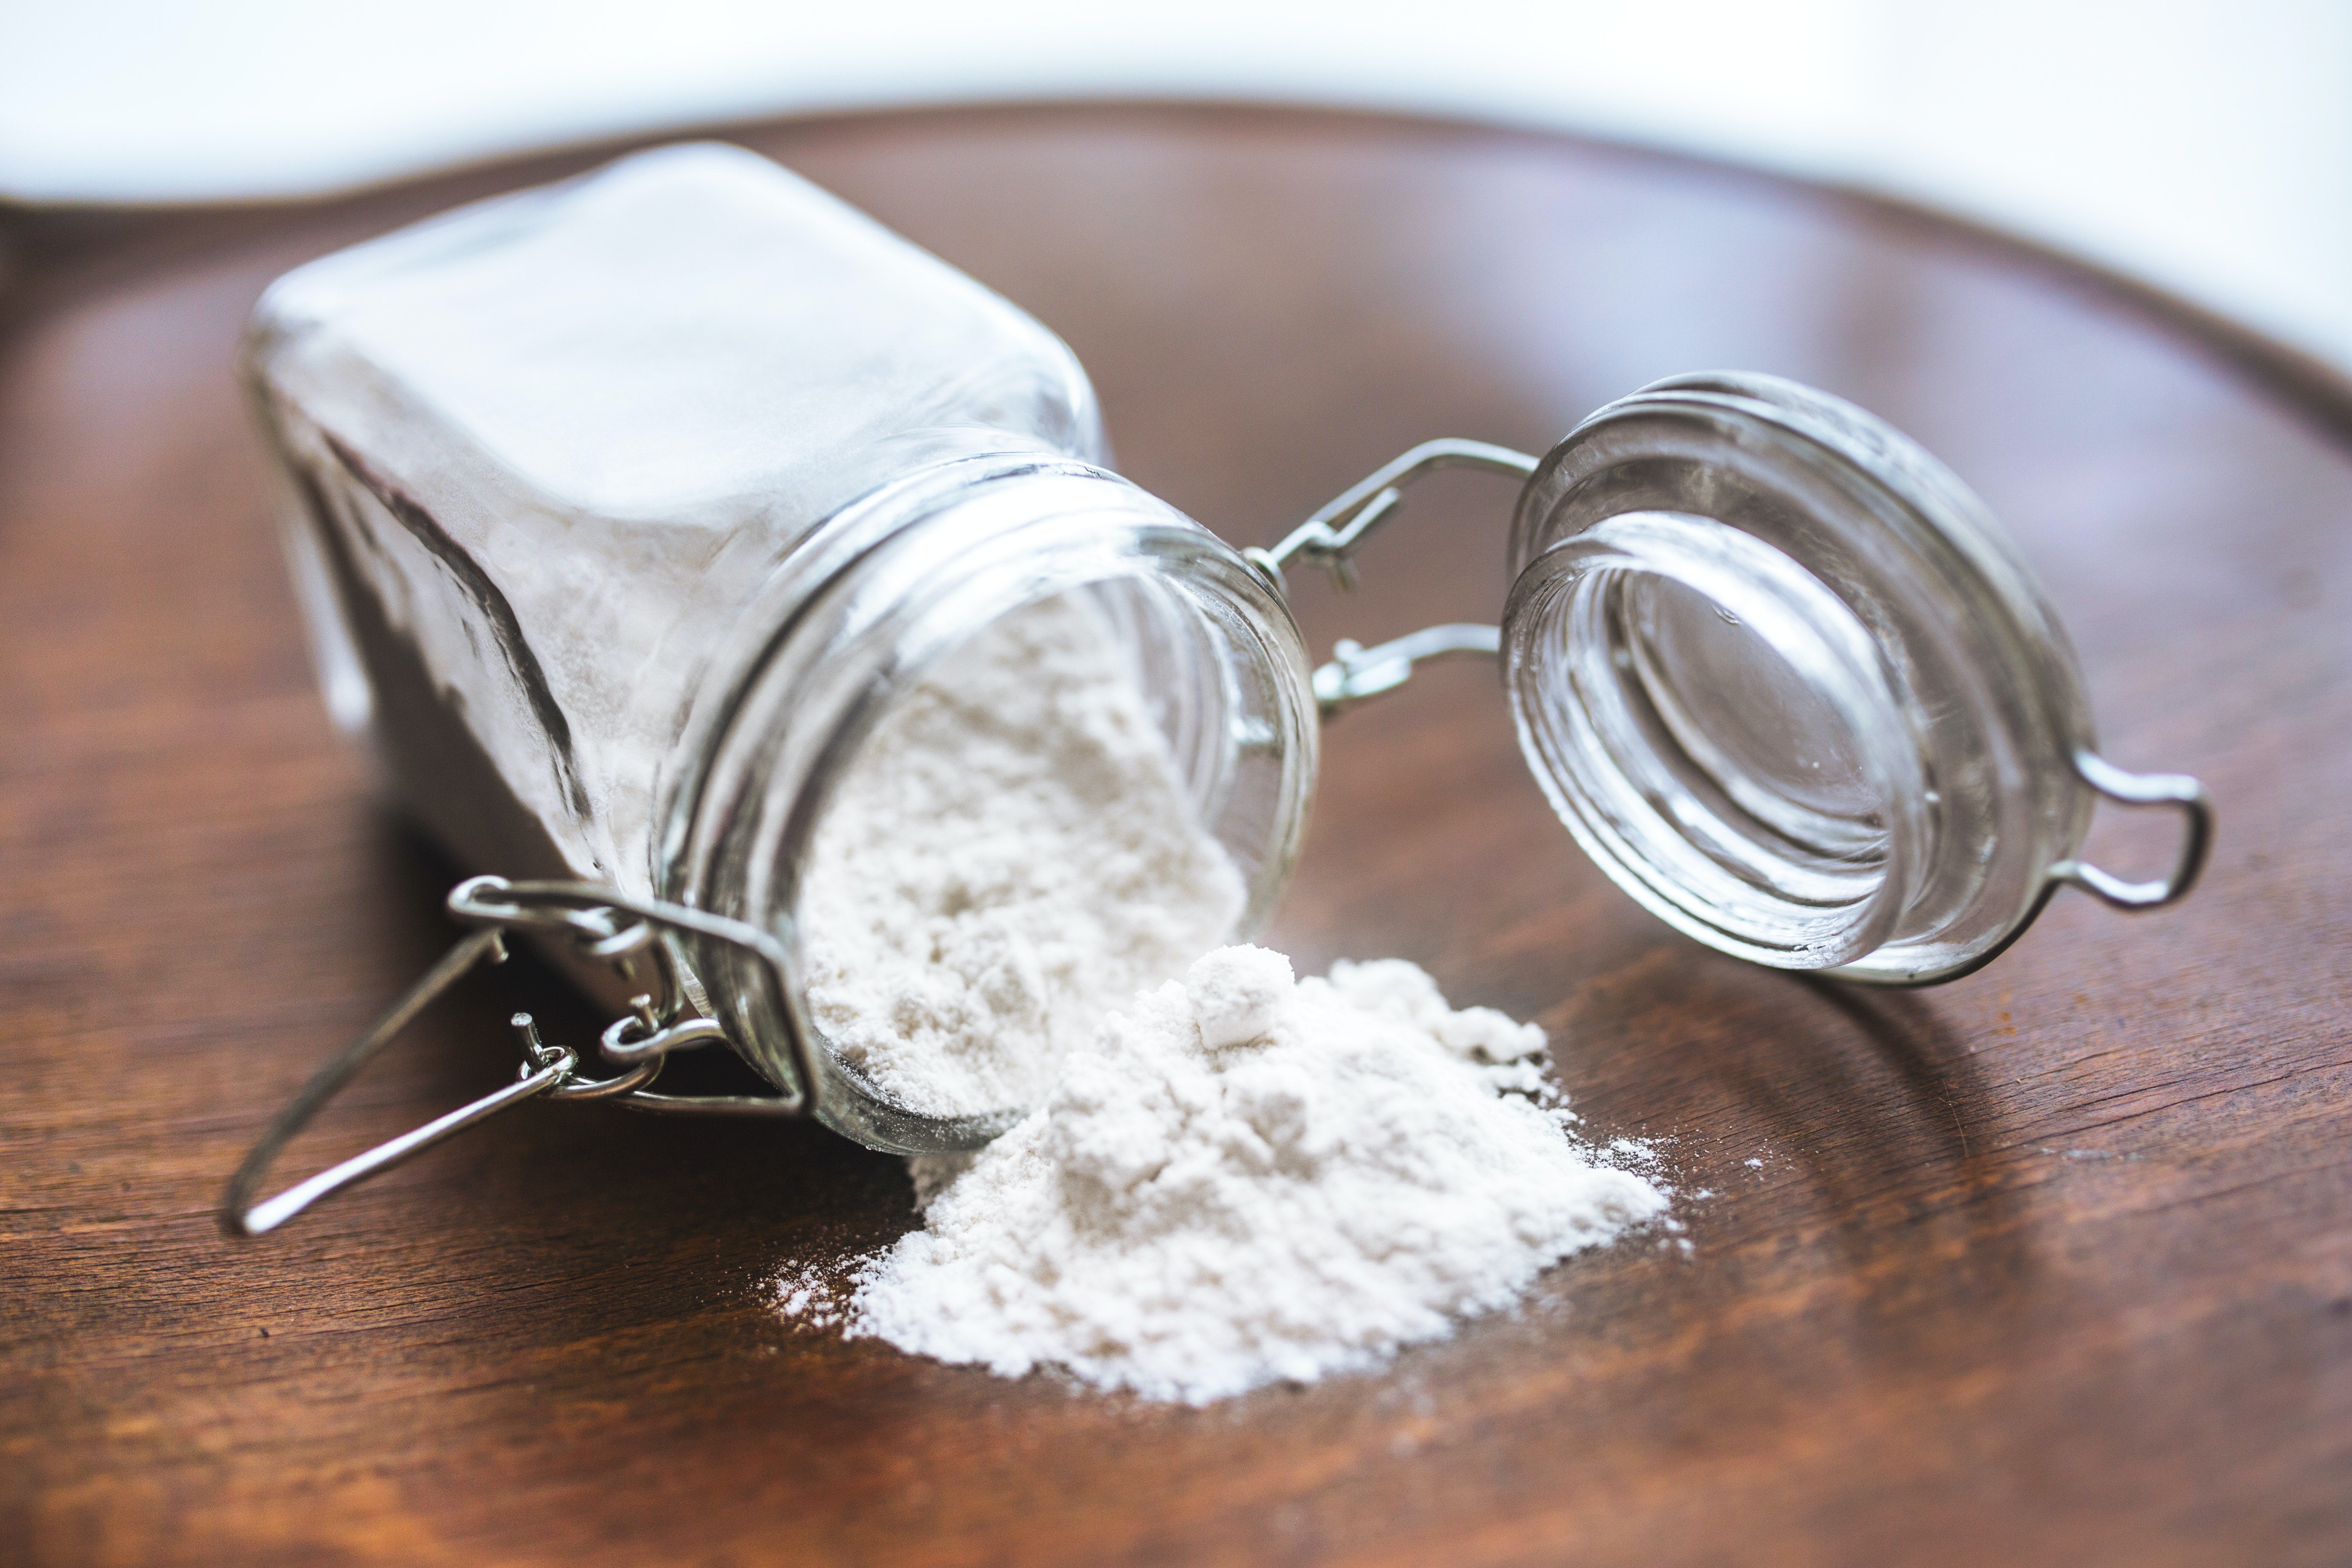 Brushing Teeth with Baking Soda: Uses and Side Effects